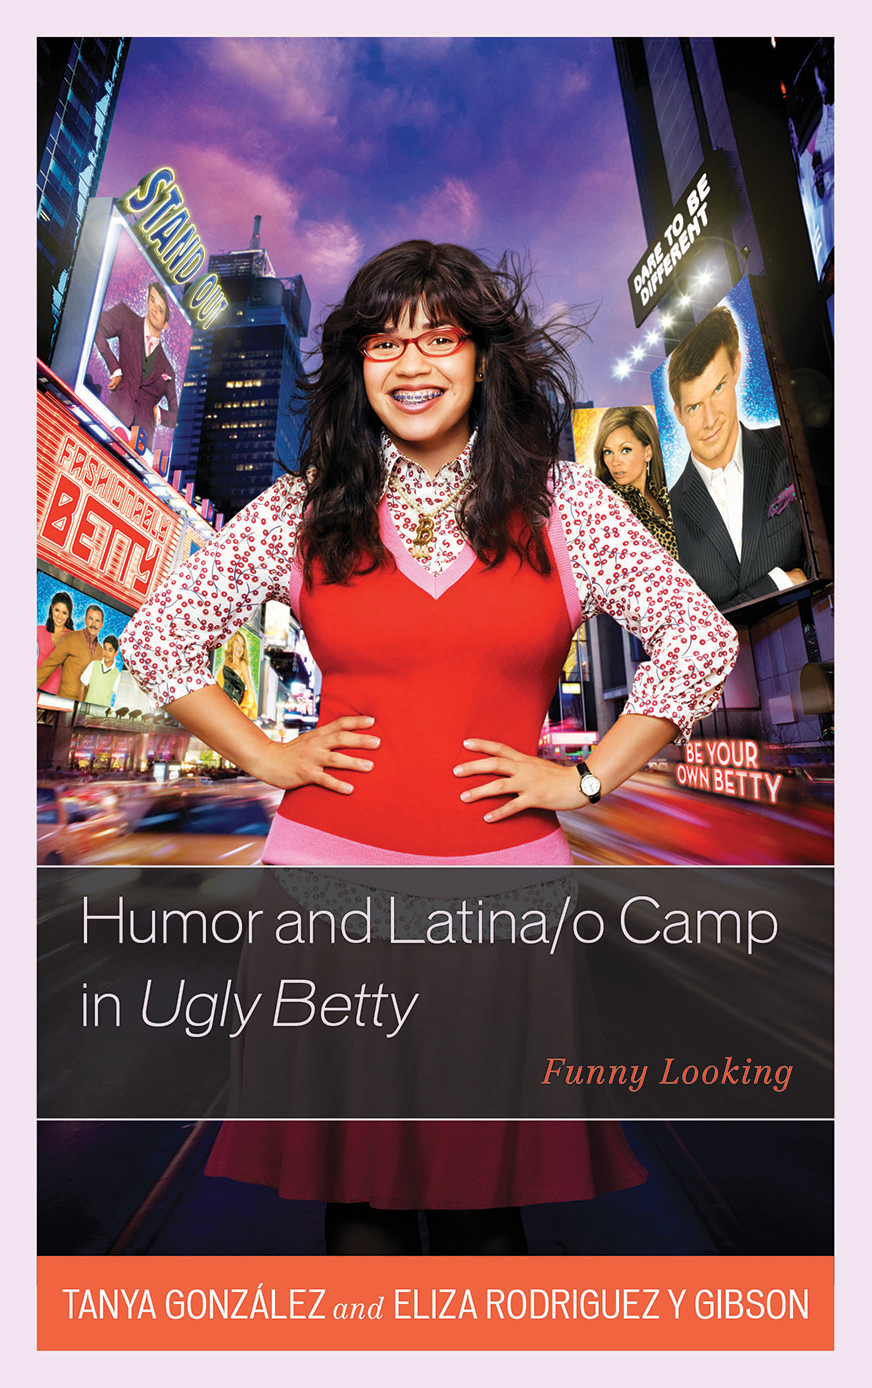 Tanya González & Eliza Rodriguez y Gibson, Humor and Latina/o Camp in Ugly Betty